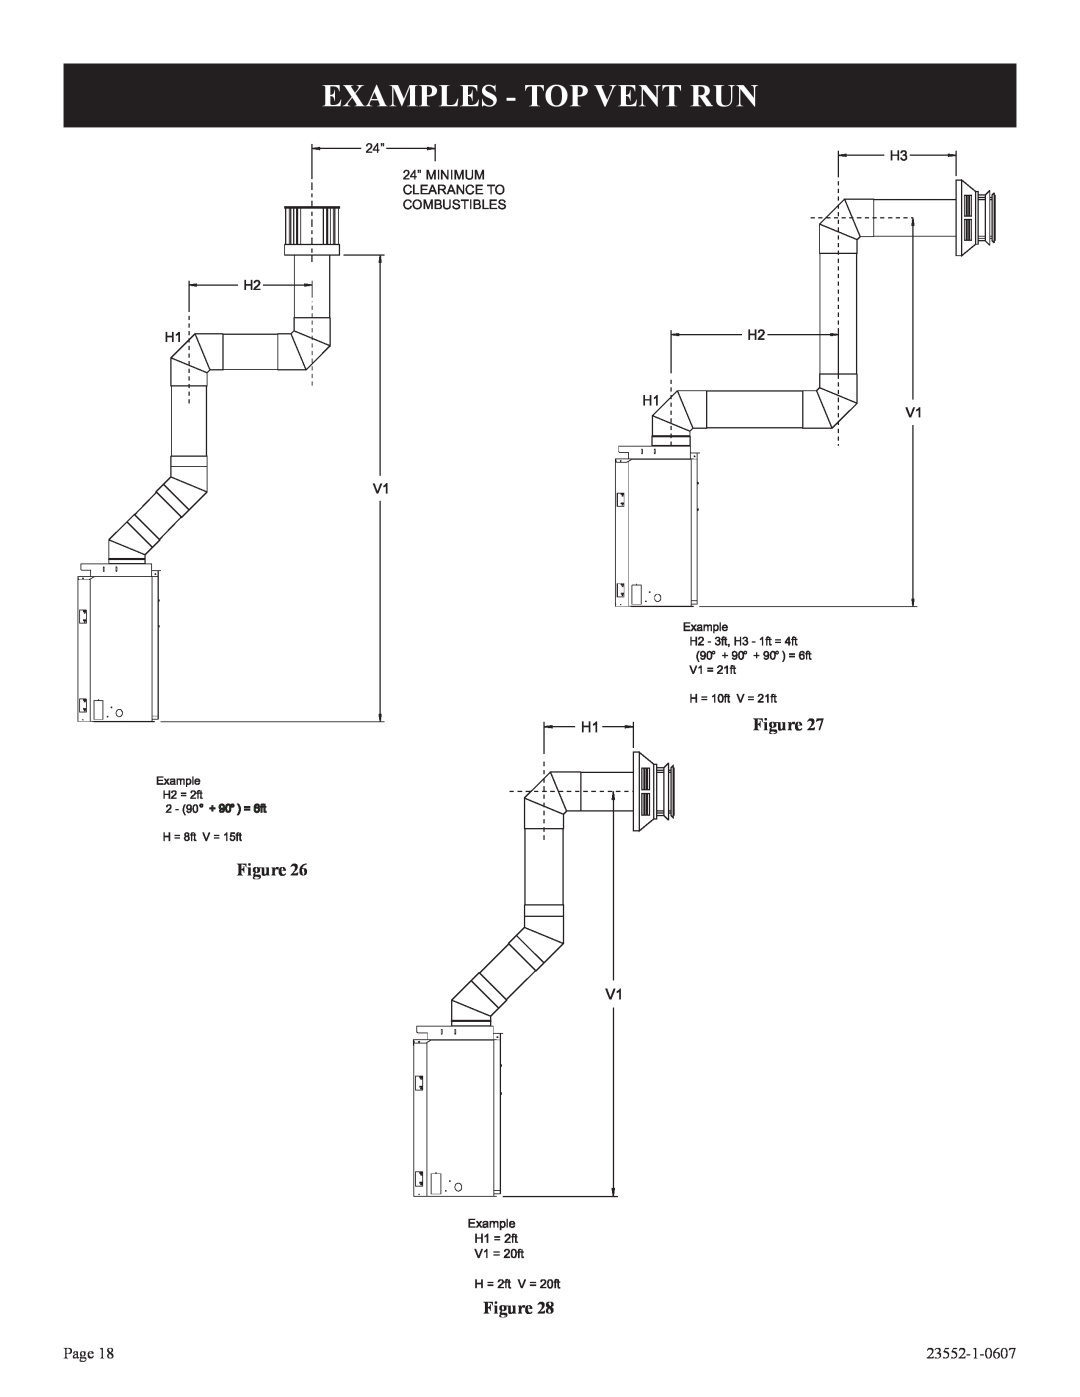 Empire Comfort Systems DVD42FP5, DVD48FP5, DVD48FP3 Examples - Top Vent Run, Figure Figure Figure, Page, 23552-1-0607 